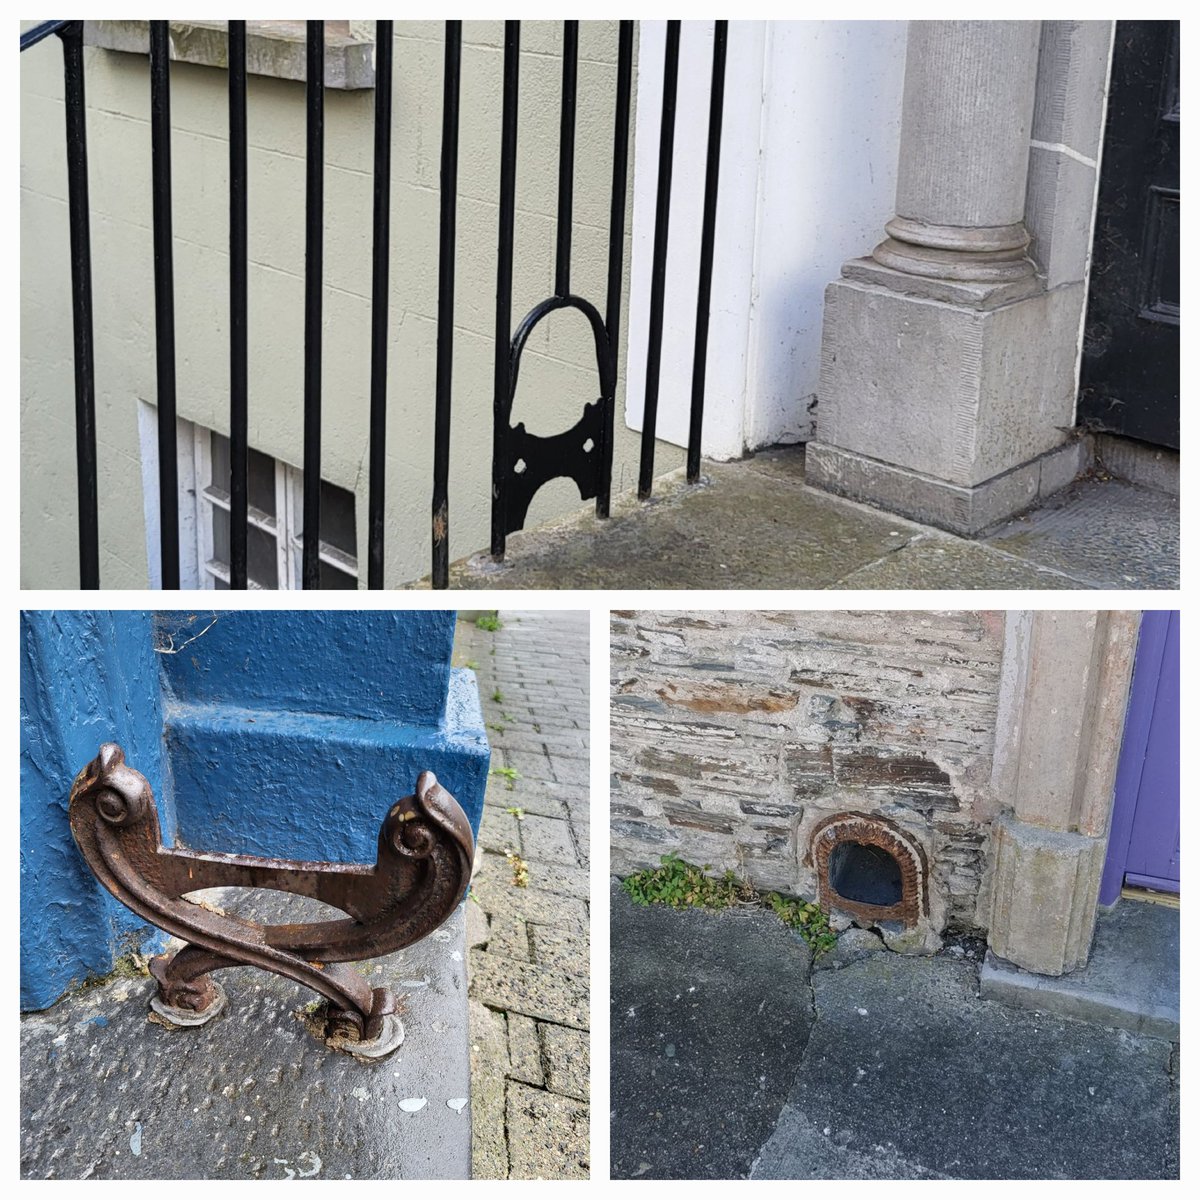 A relic of a time of filthy streets often covered in animal dung, some nice examples of boot scrappers around the streets of #Kilkenny and #waterford